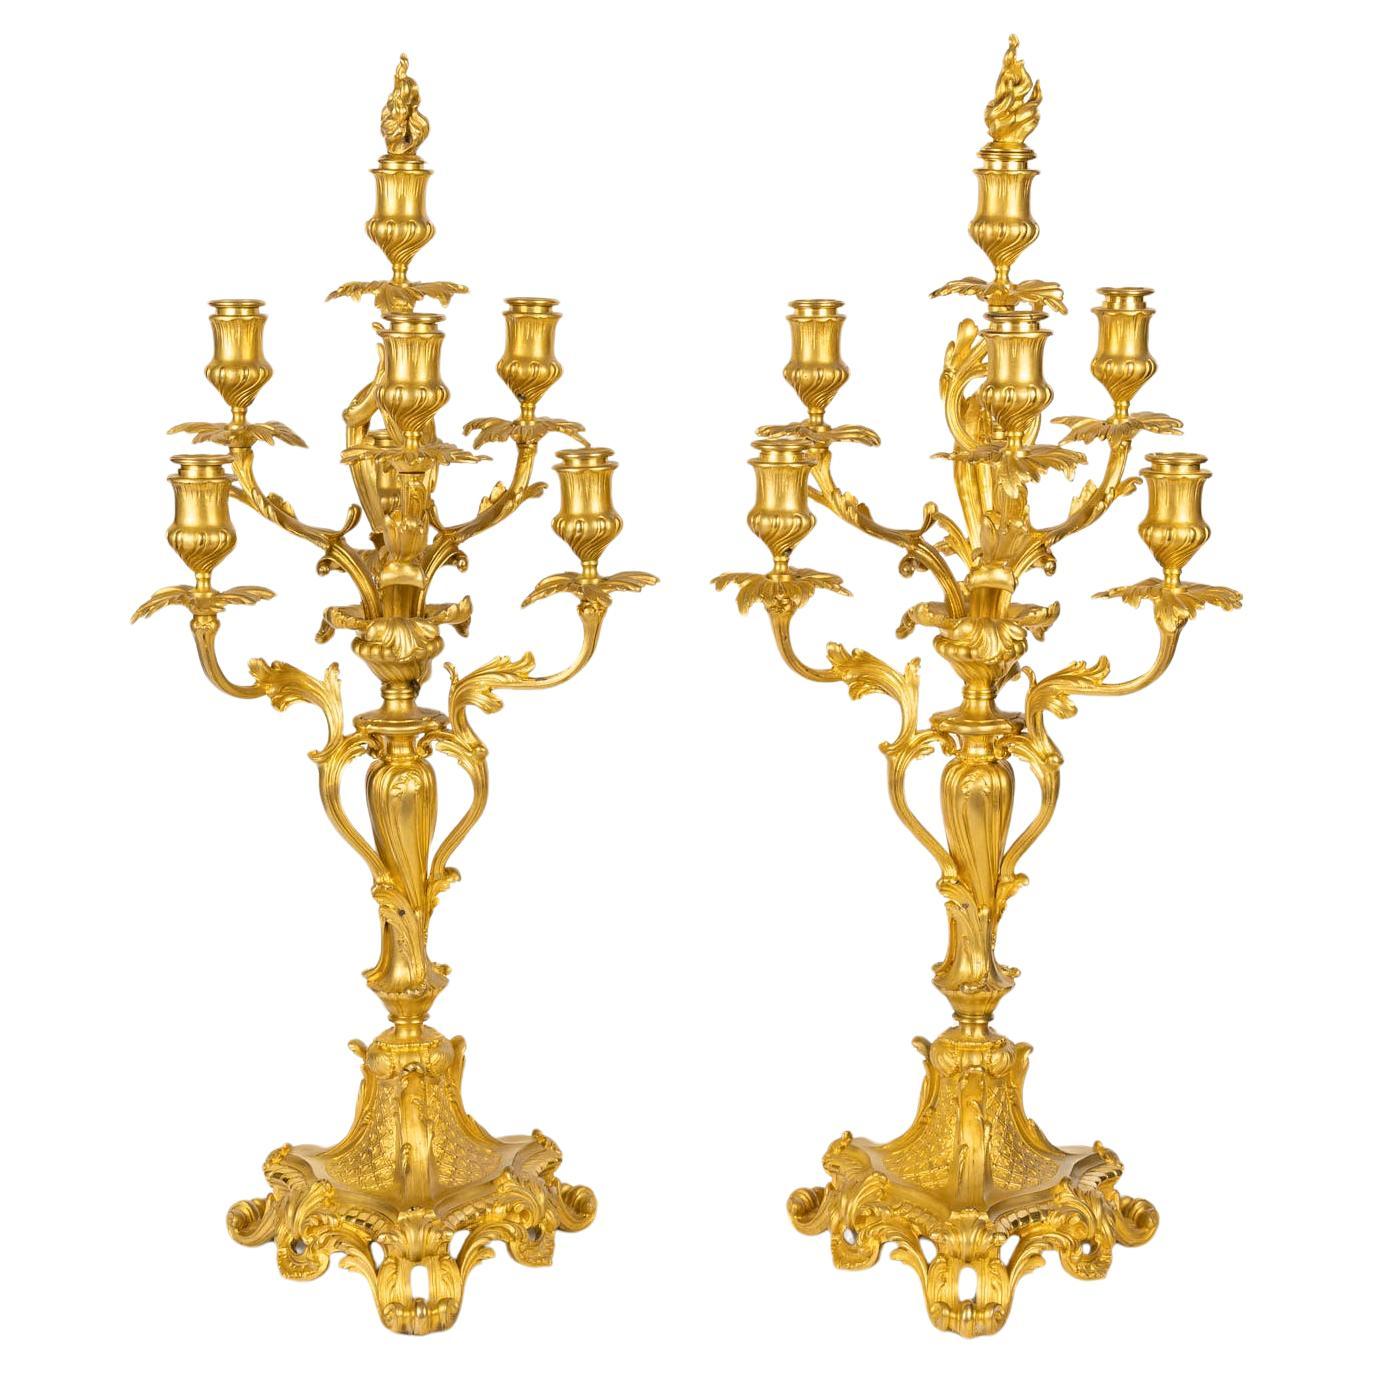 A Large Pair of Louis XV Style Gilt Bronze Candelabra, Signed Barbedienne. For Sale